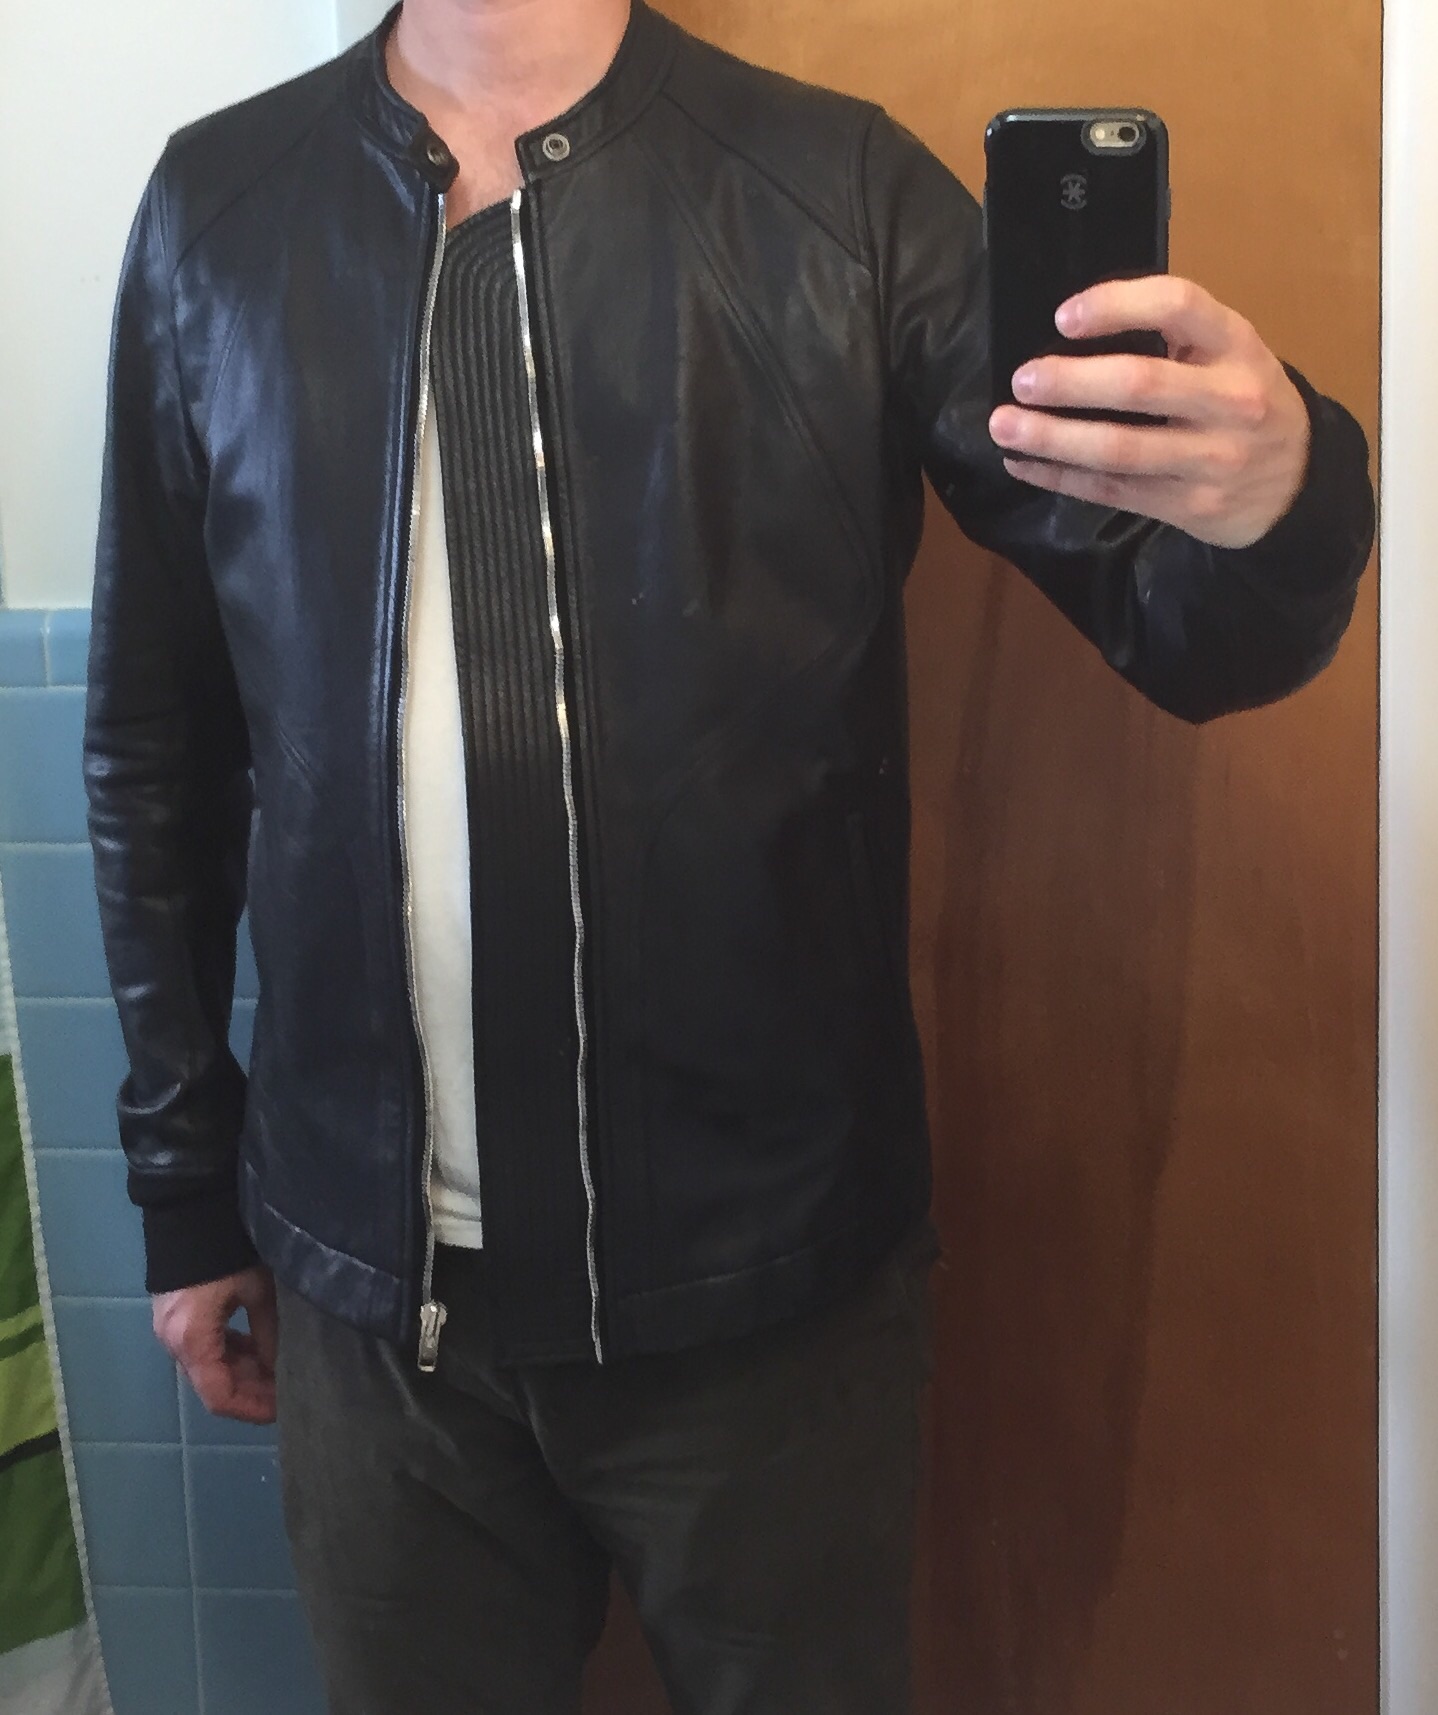 Leather Jackets: Post Pictures of the Best You've Seen/Owned 